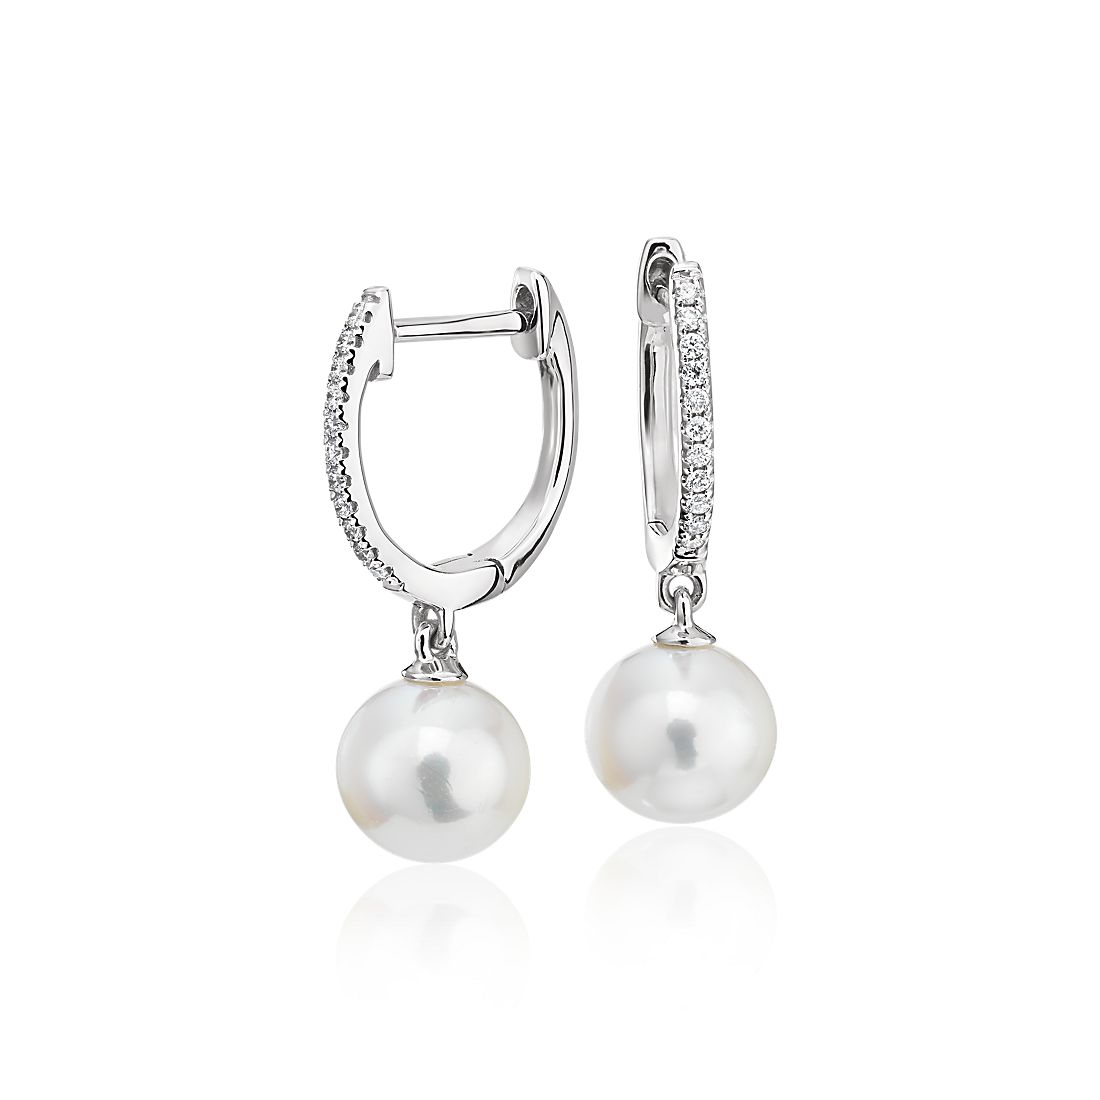 14K White Gold Curved Freshwater Cultured Pearl and Diamond Earrings 